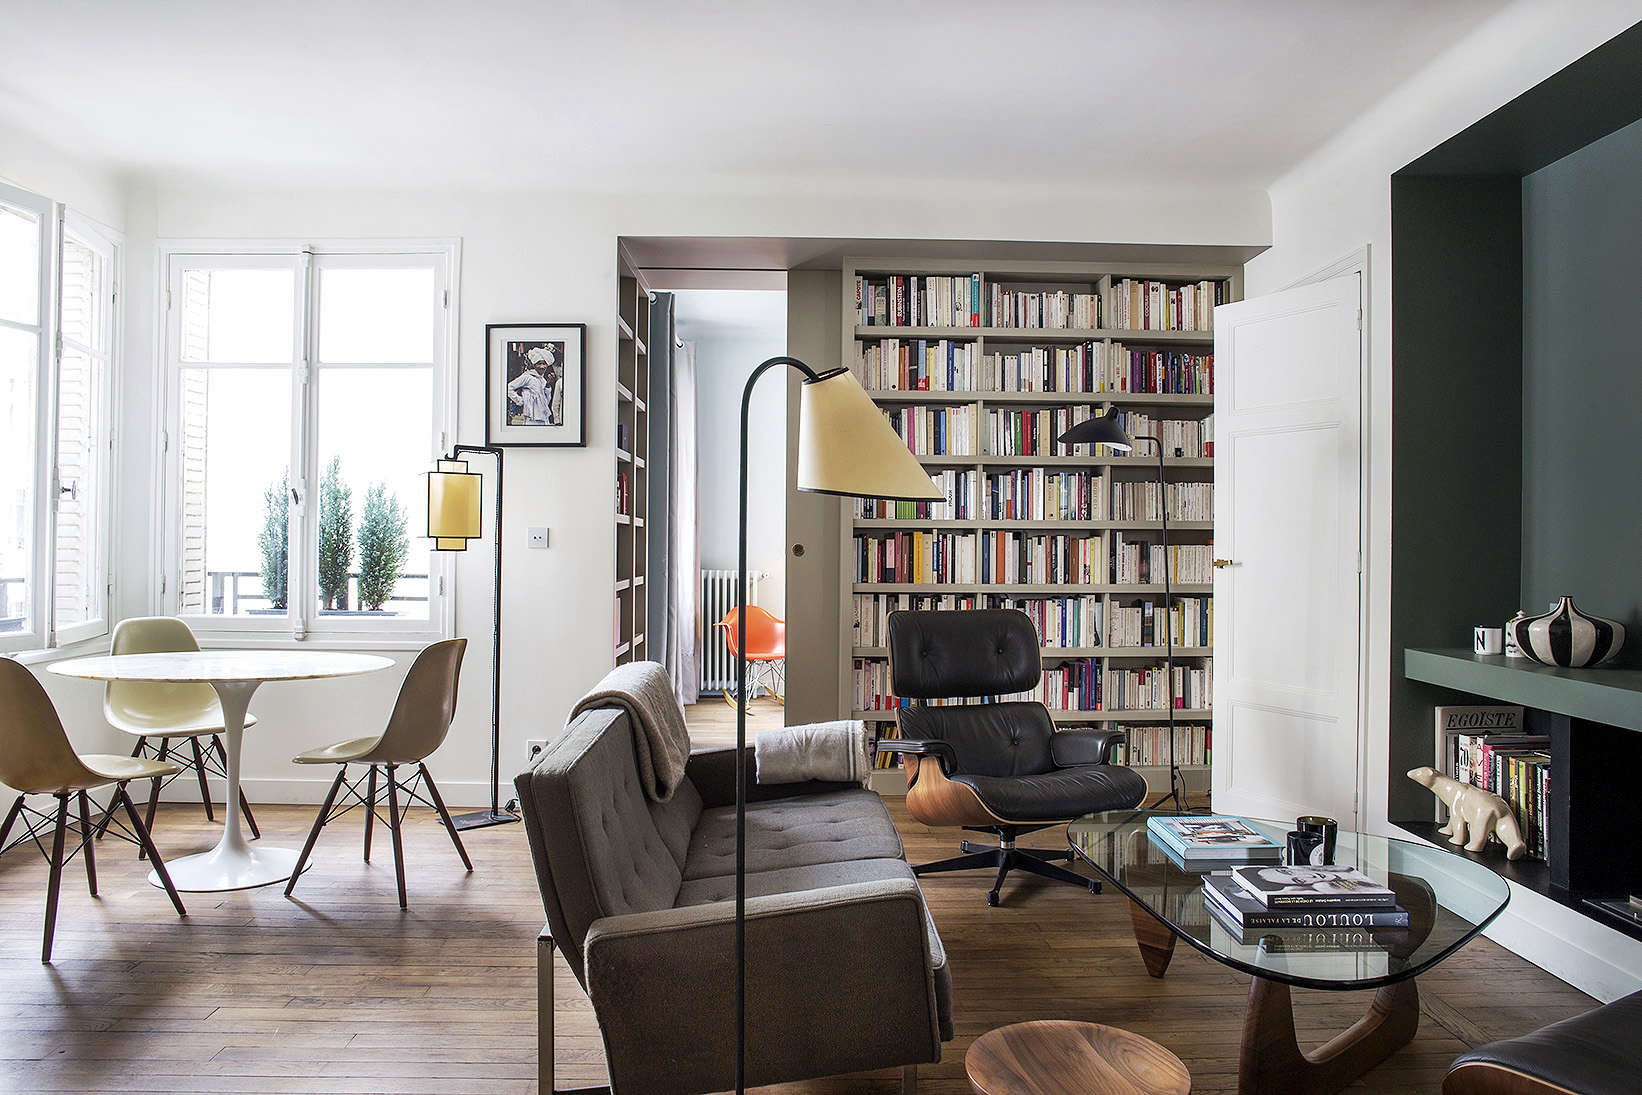 9 SmallSpace Ideas to Steal from a Tiny Paris Apartment